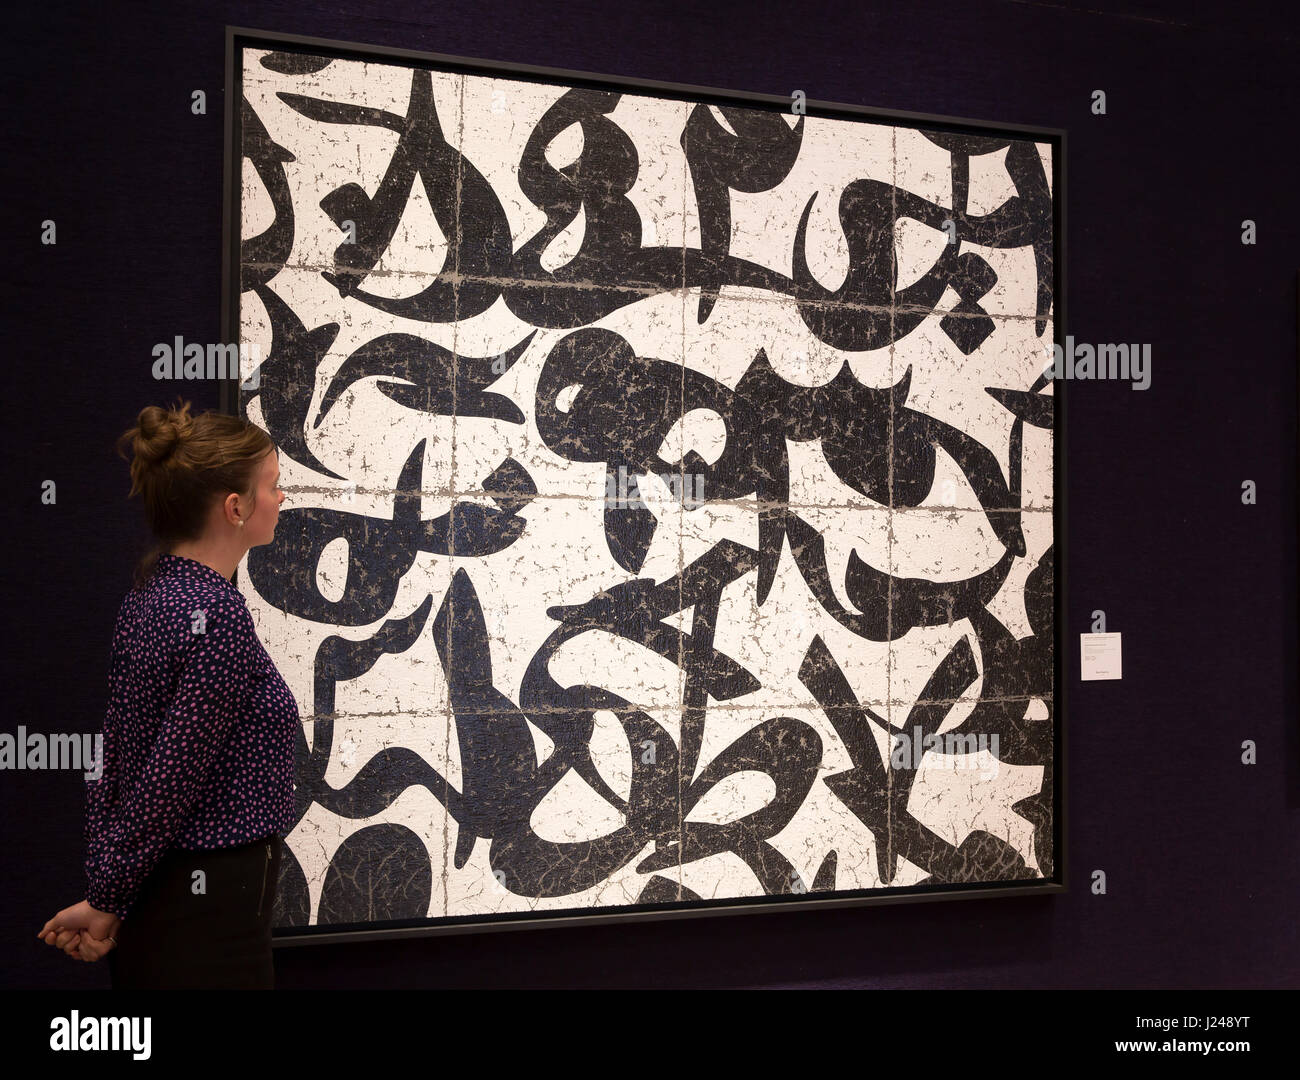 Mayfair, UK. 24th Apr, 2017. A Photocall for Masterpieces of Modern Middle Eastern Art at Bonhams in Mayfair took place prior to the Sale on the 26th April 2017. Highlights included 842L1 by Farhad Moshiri Credit: Keith Larby/Alamy Live News Stock Photo